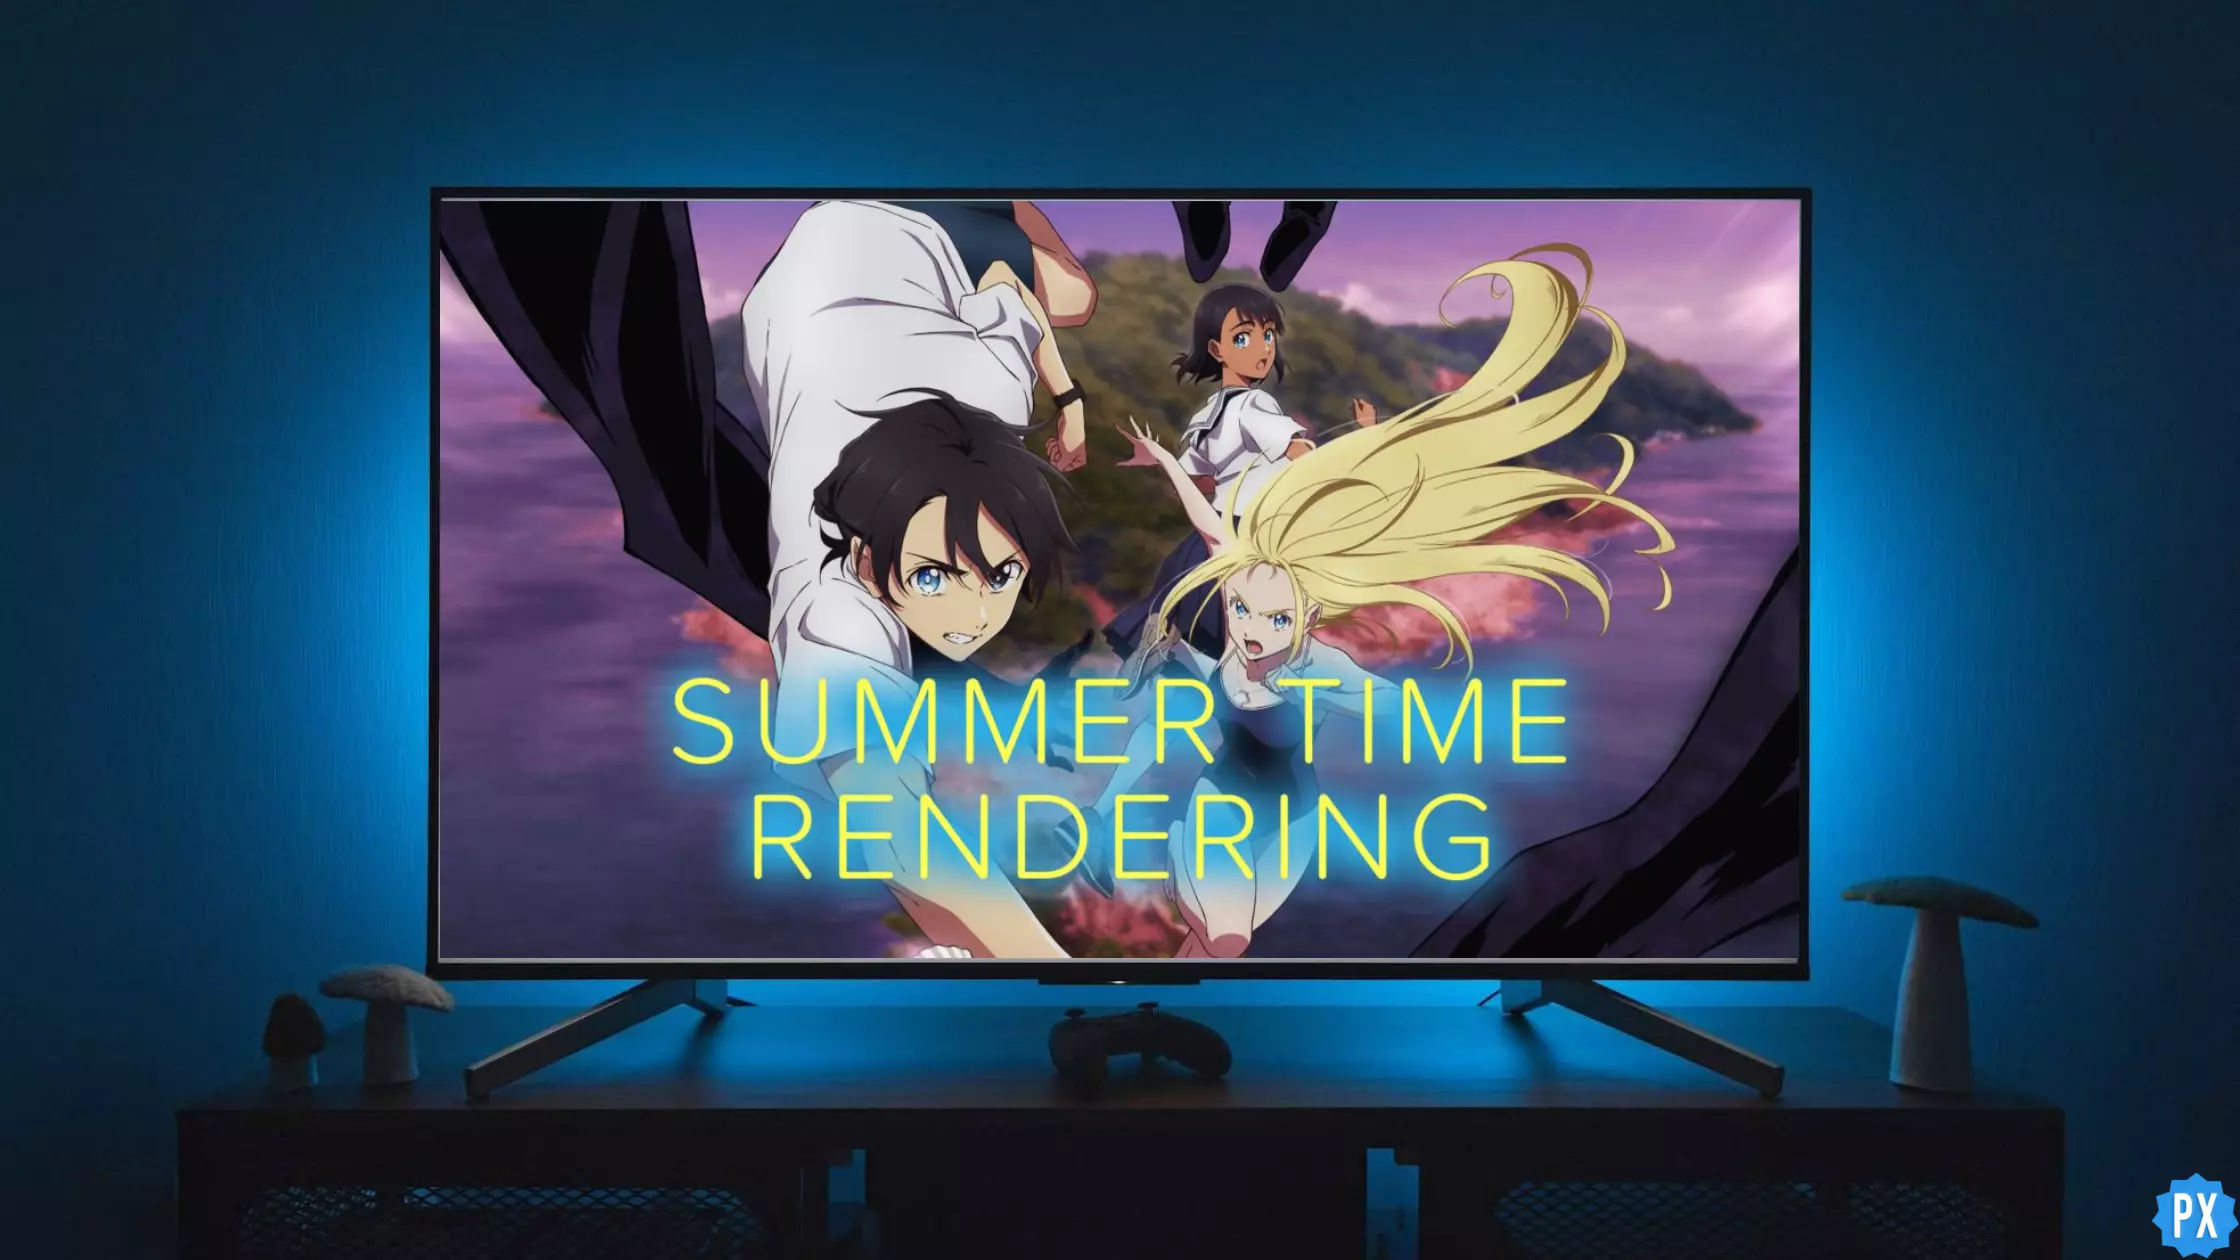 Summer Time Rendering: Where to Watch and Stream Online